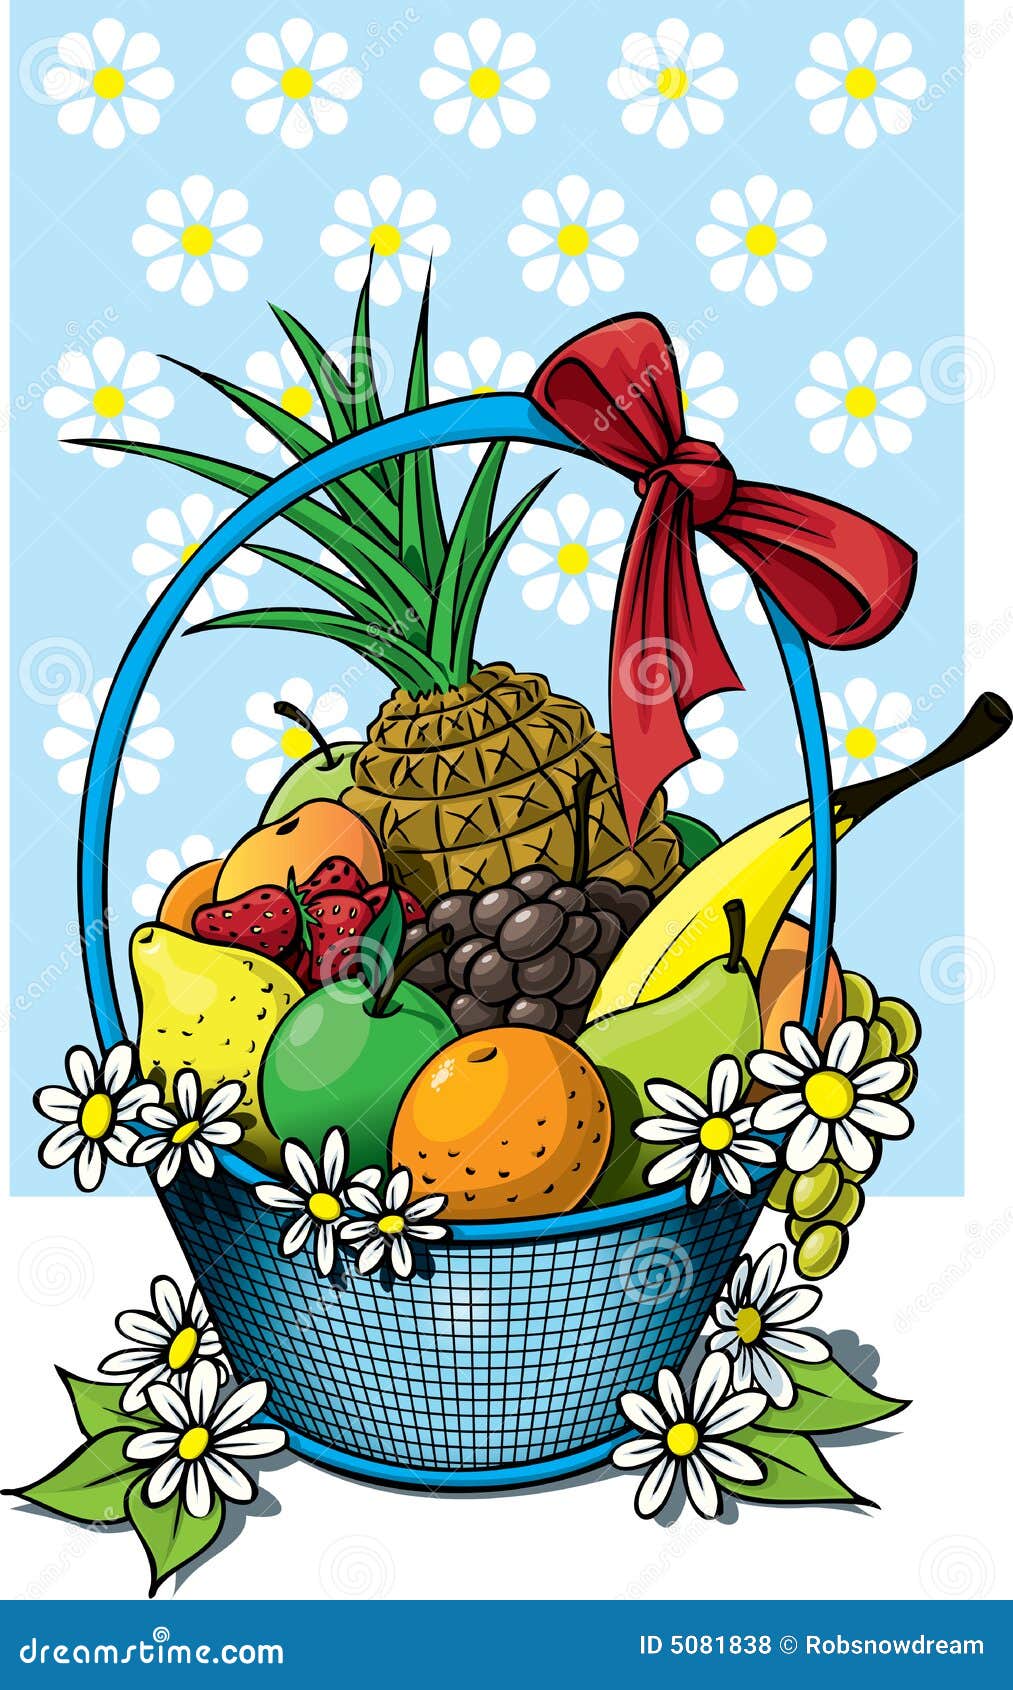 Premium AI Image | a drawing of a basket of fruit with a pineapple and  grapes.-saigonsouth.com.vn